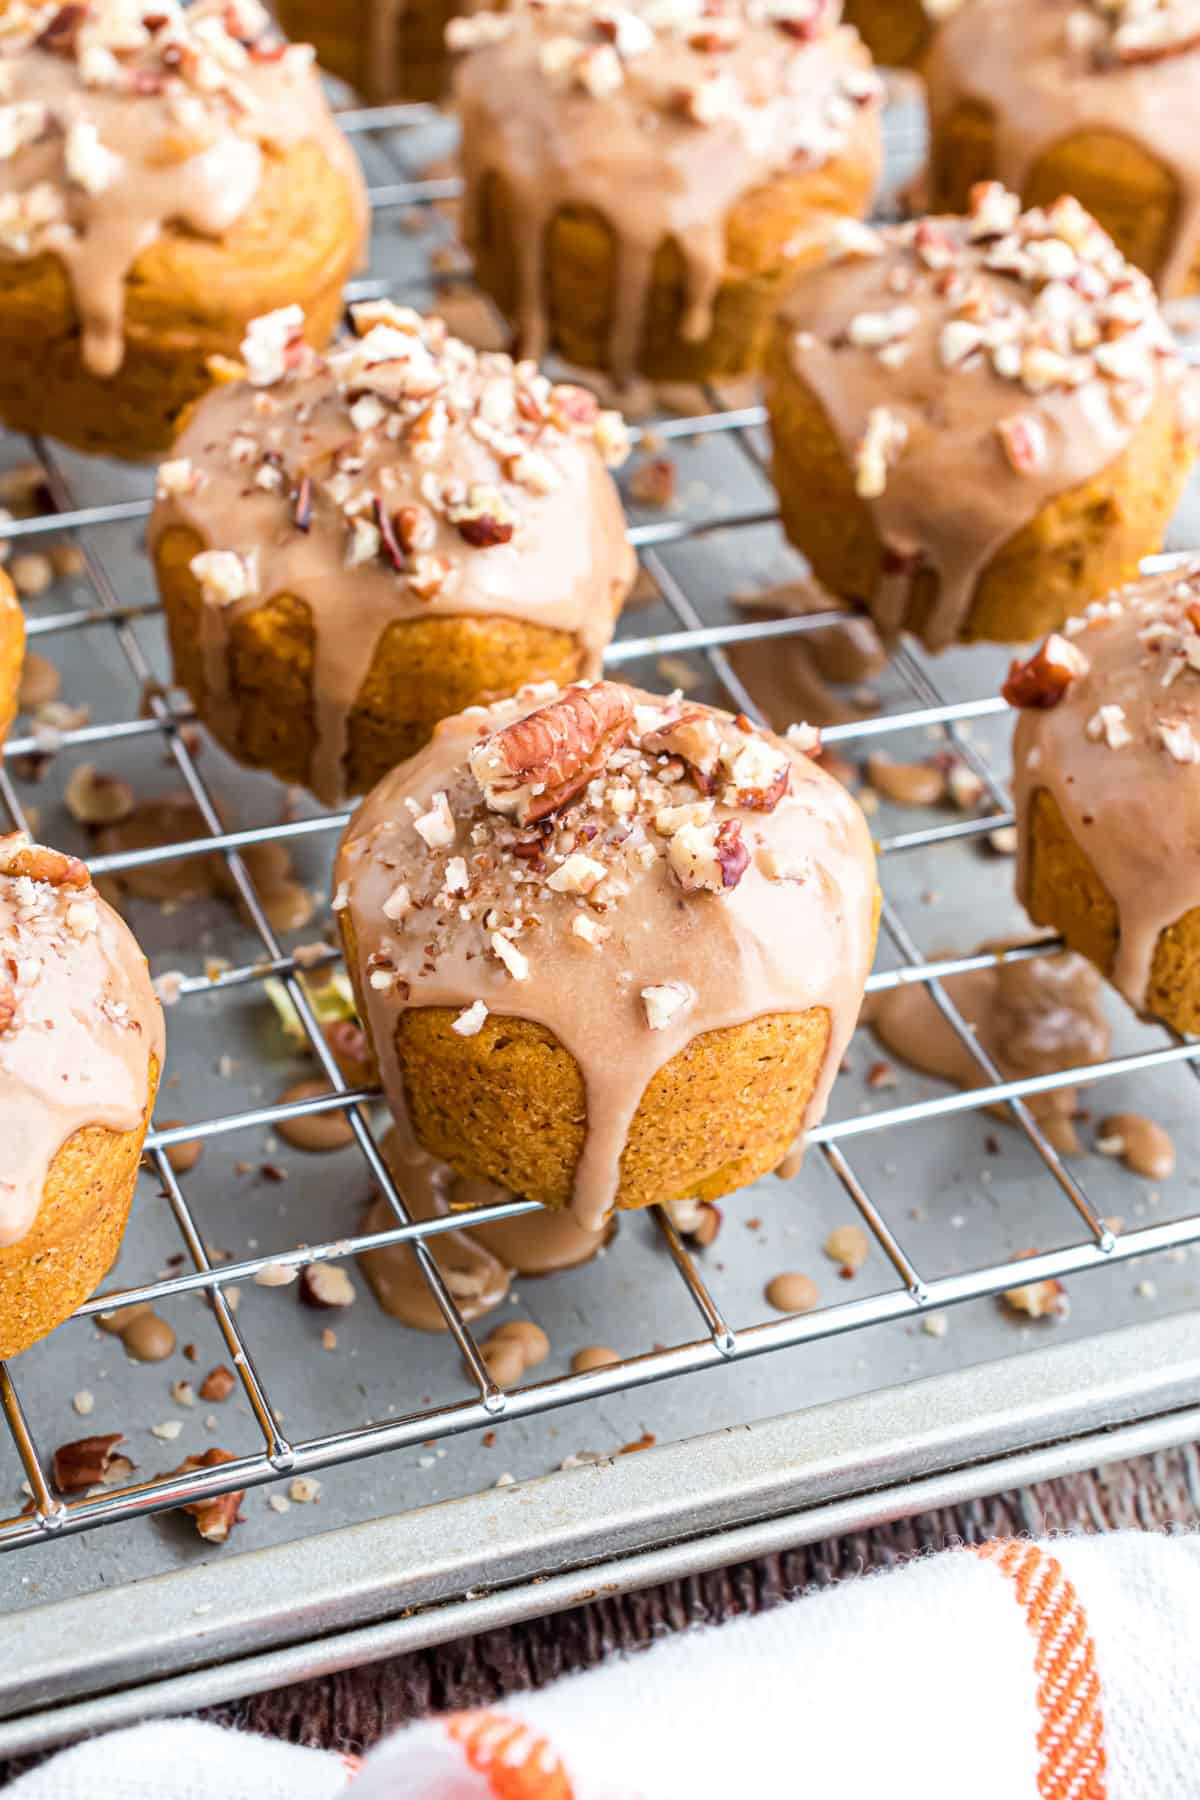 Mini muffins with glaze and pecans on a wire cooling rack.